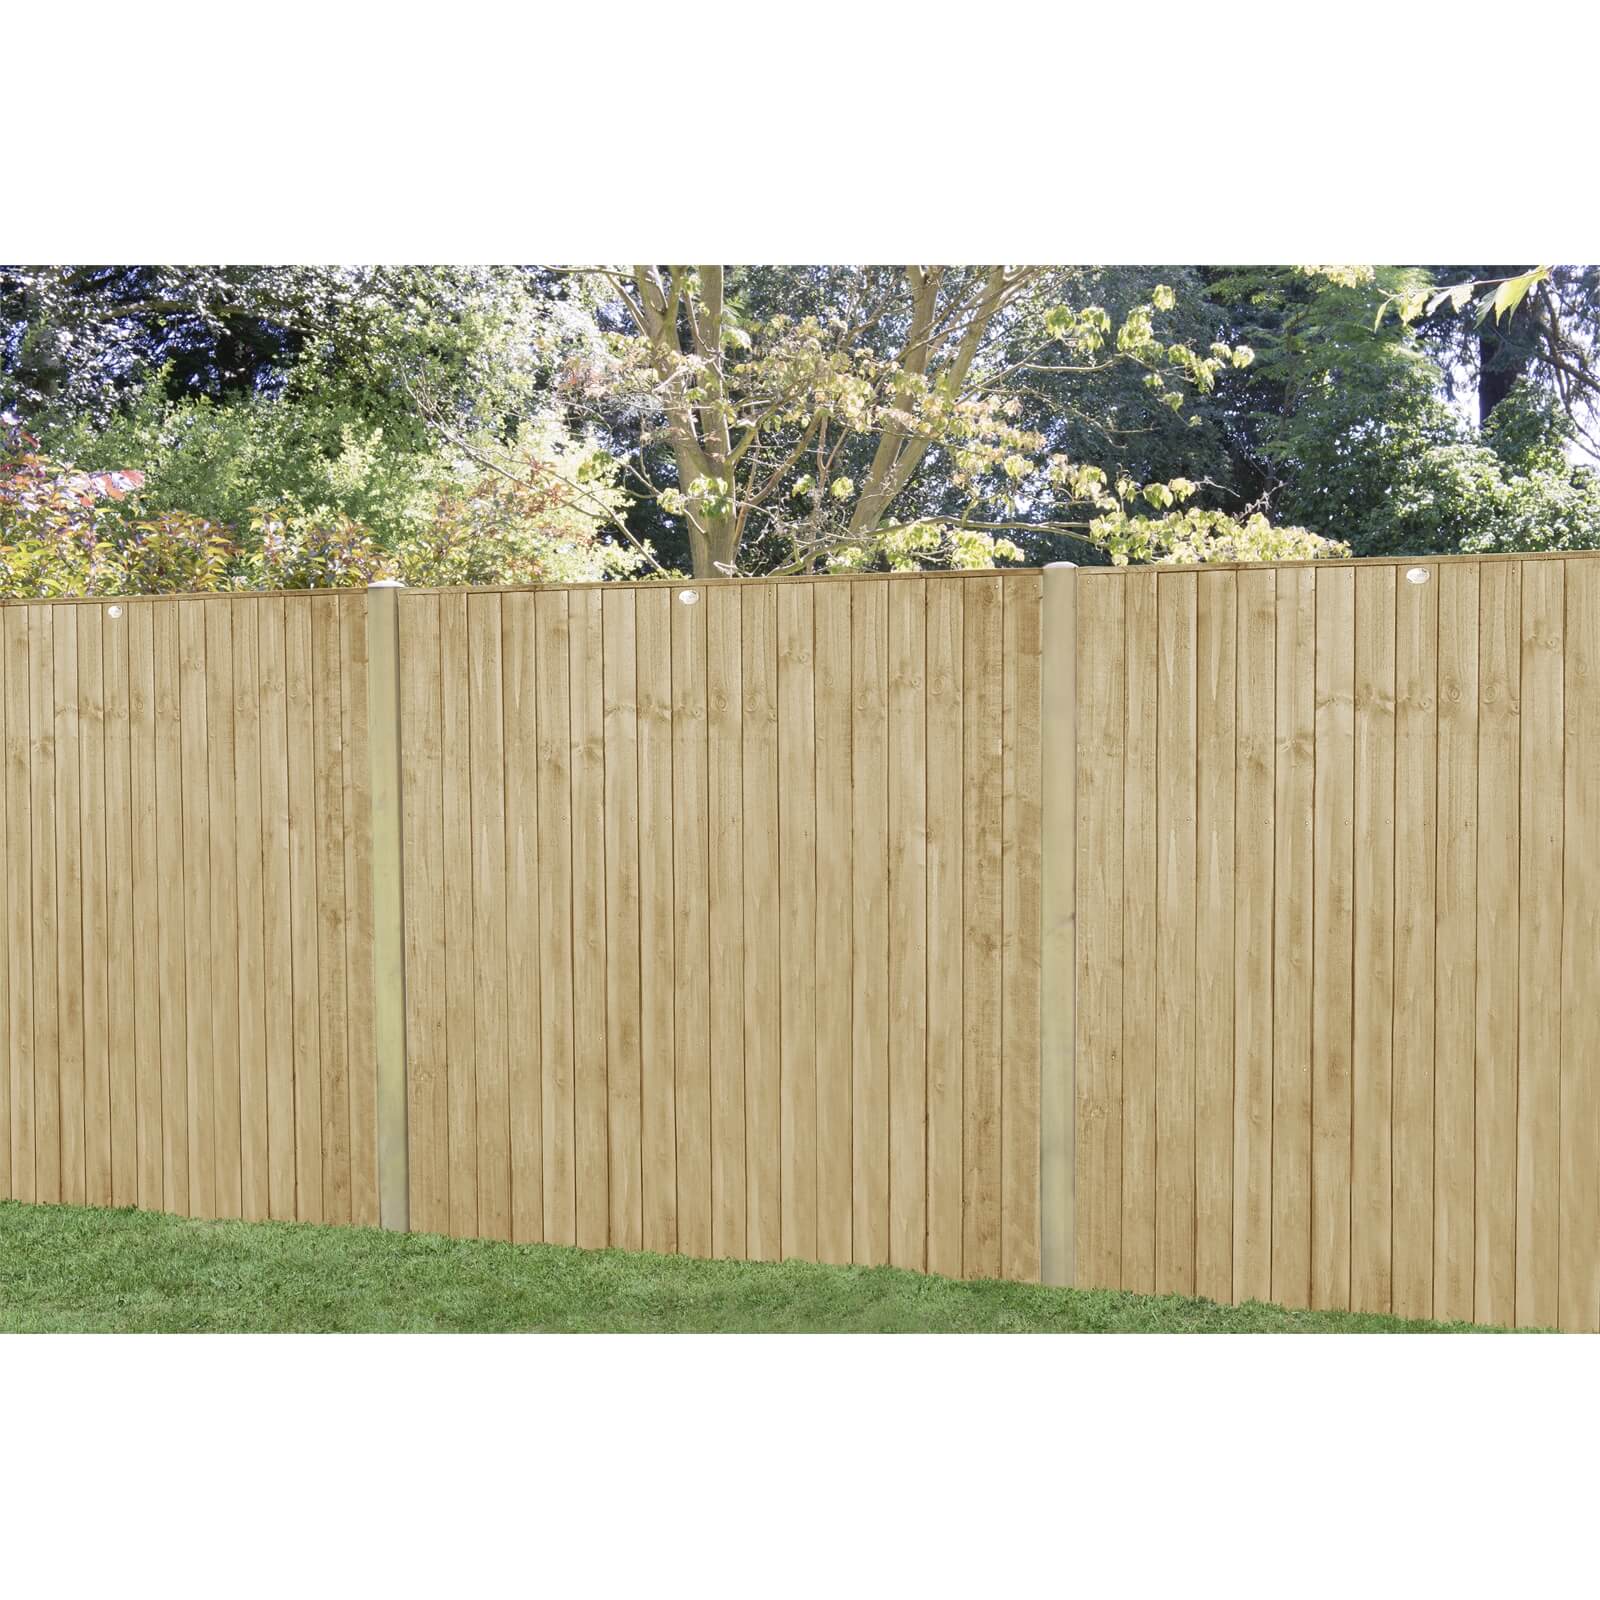 6ft x 5ft (1.83m x 1.54m) Pressure Treated Featheredge Fence Panel - Pack of 4